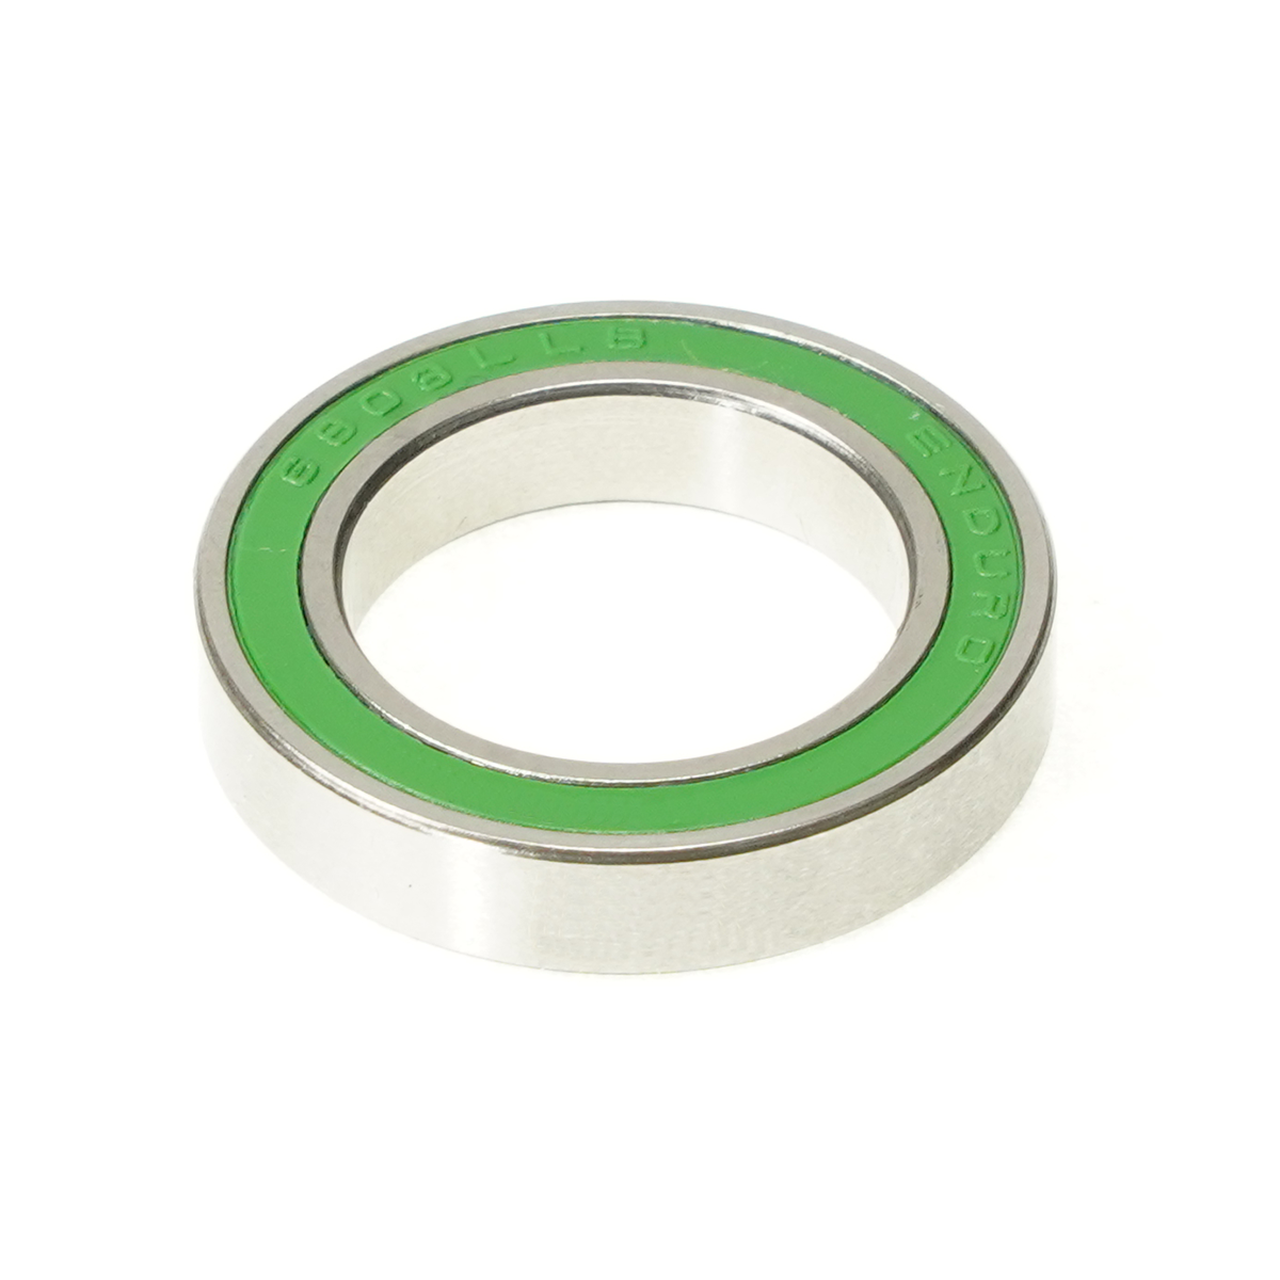 Enduro S6803 LLB - Stainless Steel Radial Bearing (C3 Clearance) - 17mm x 26mm x 5mm